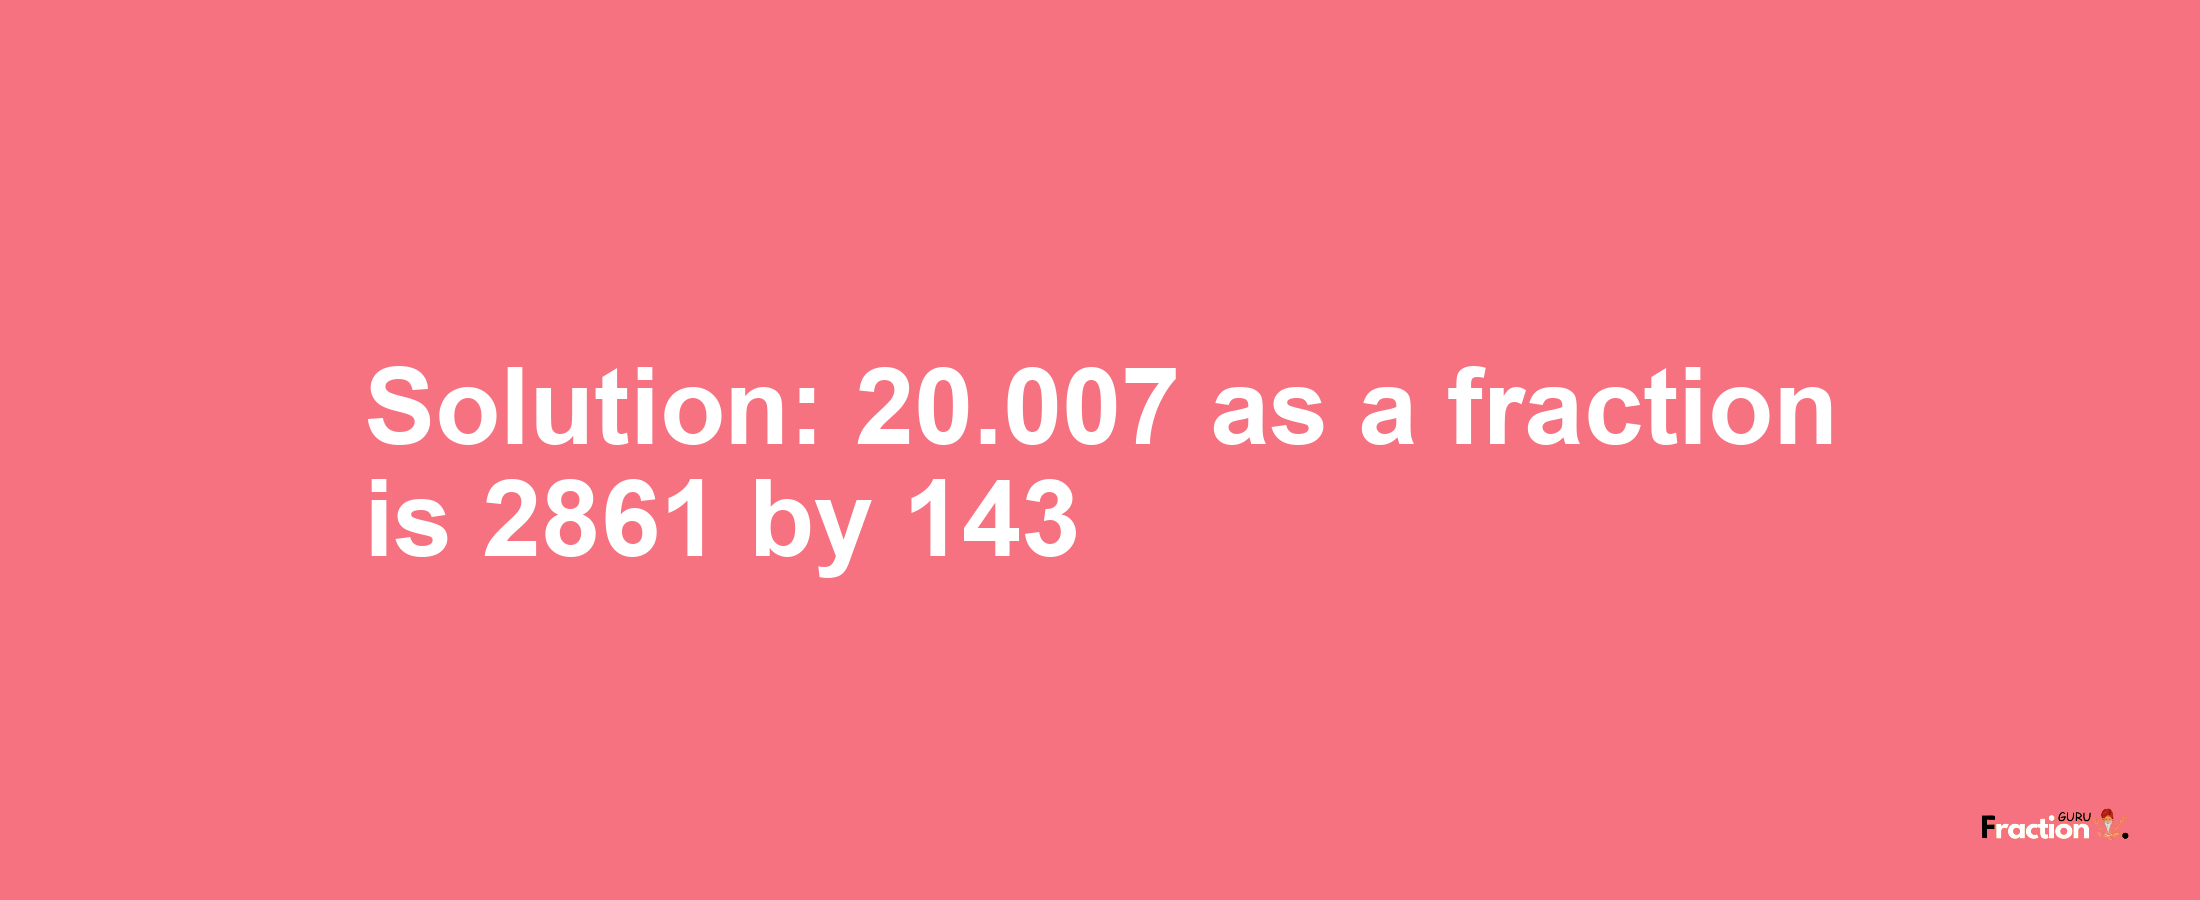 Solution:20.007 as a fraction is 2861/143